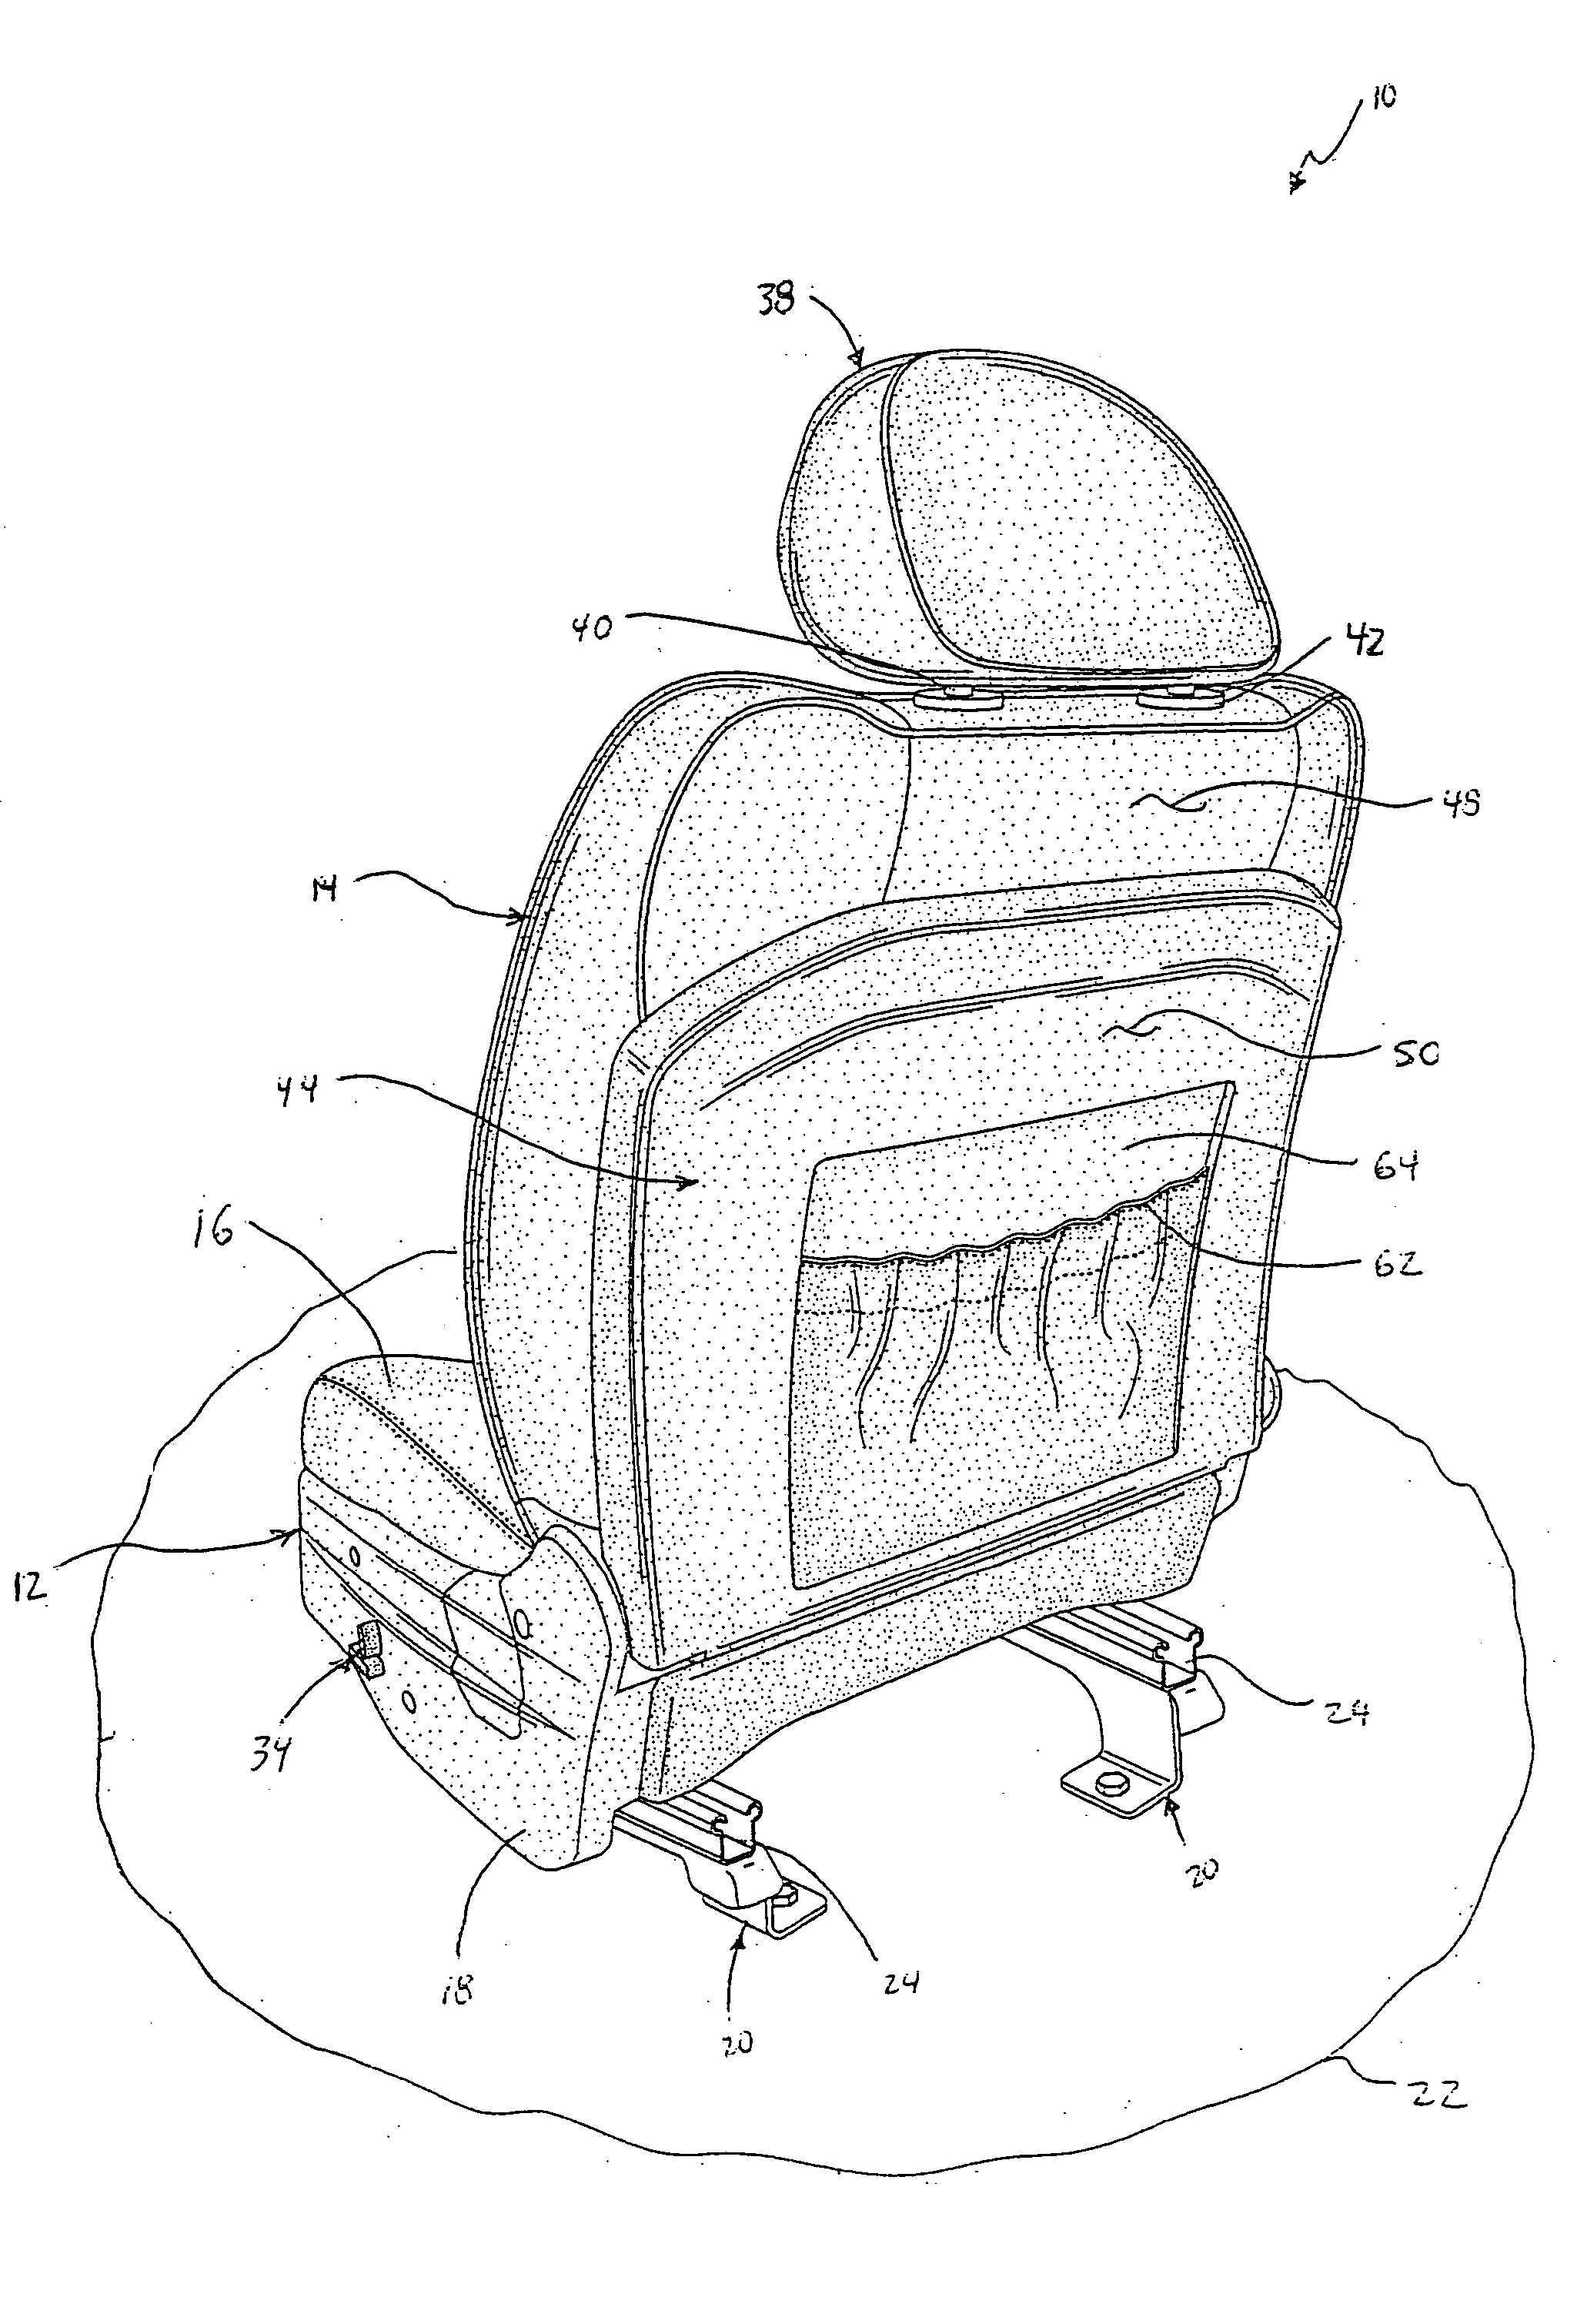 Vehicle seat incorporating a seat back panel